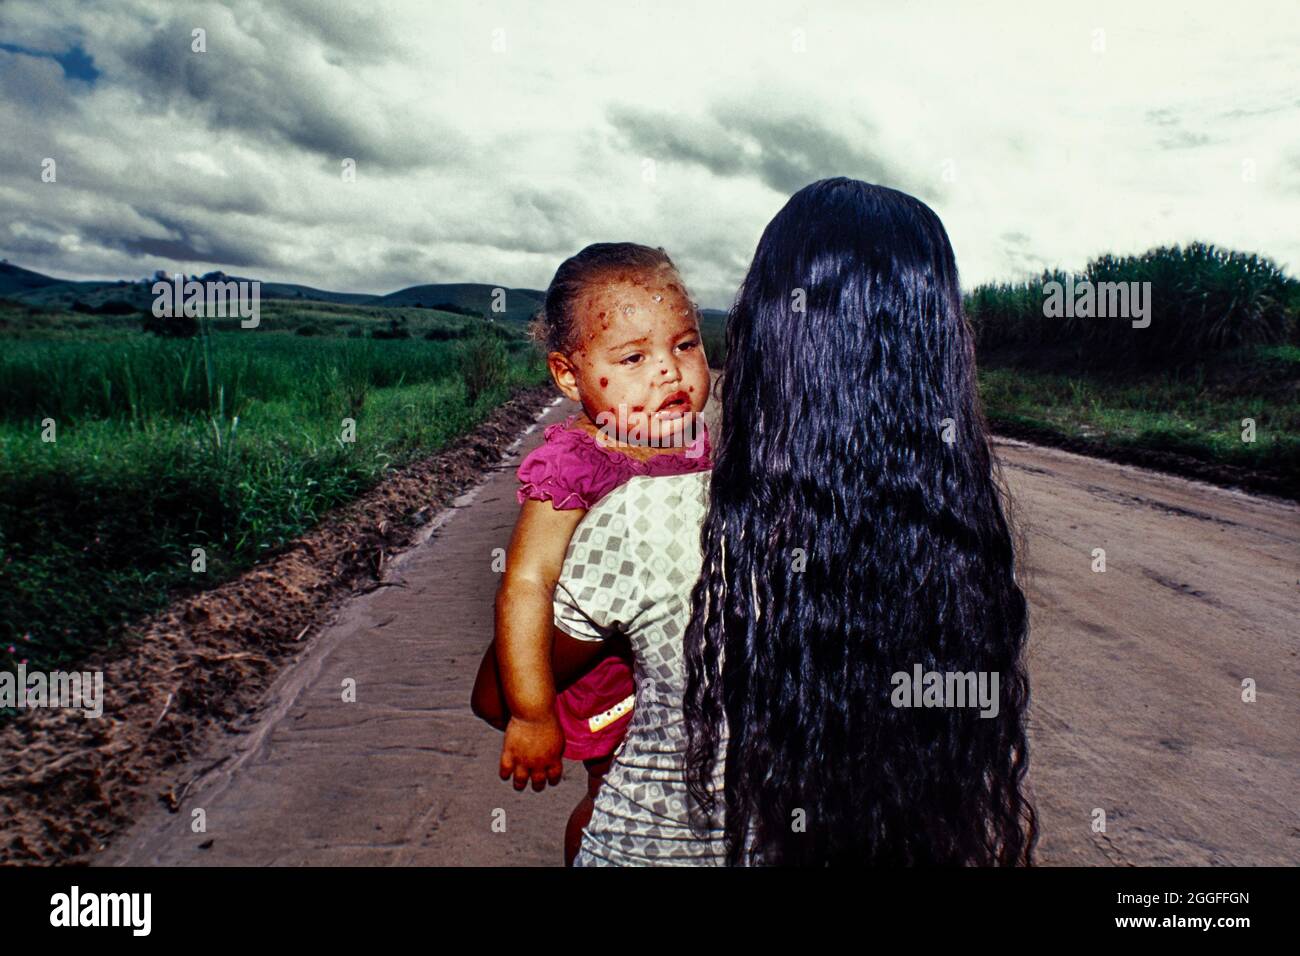 Woman takes 1-year old baby suffering from skin ulcer to hospital crossing a sugarcane plantation. Stock Photo